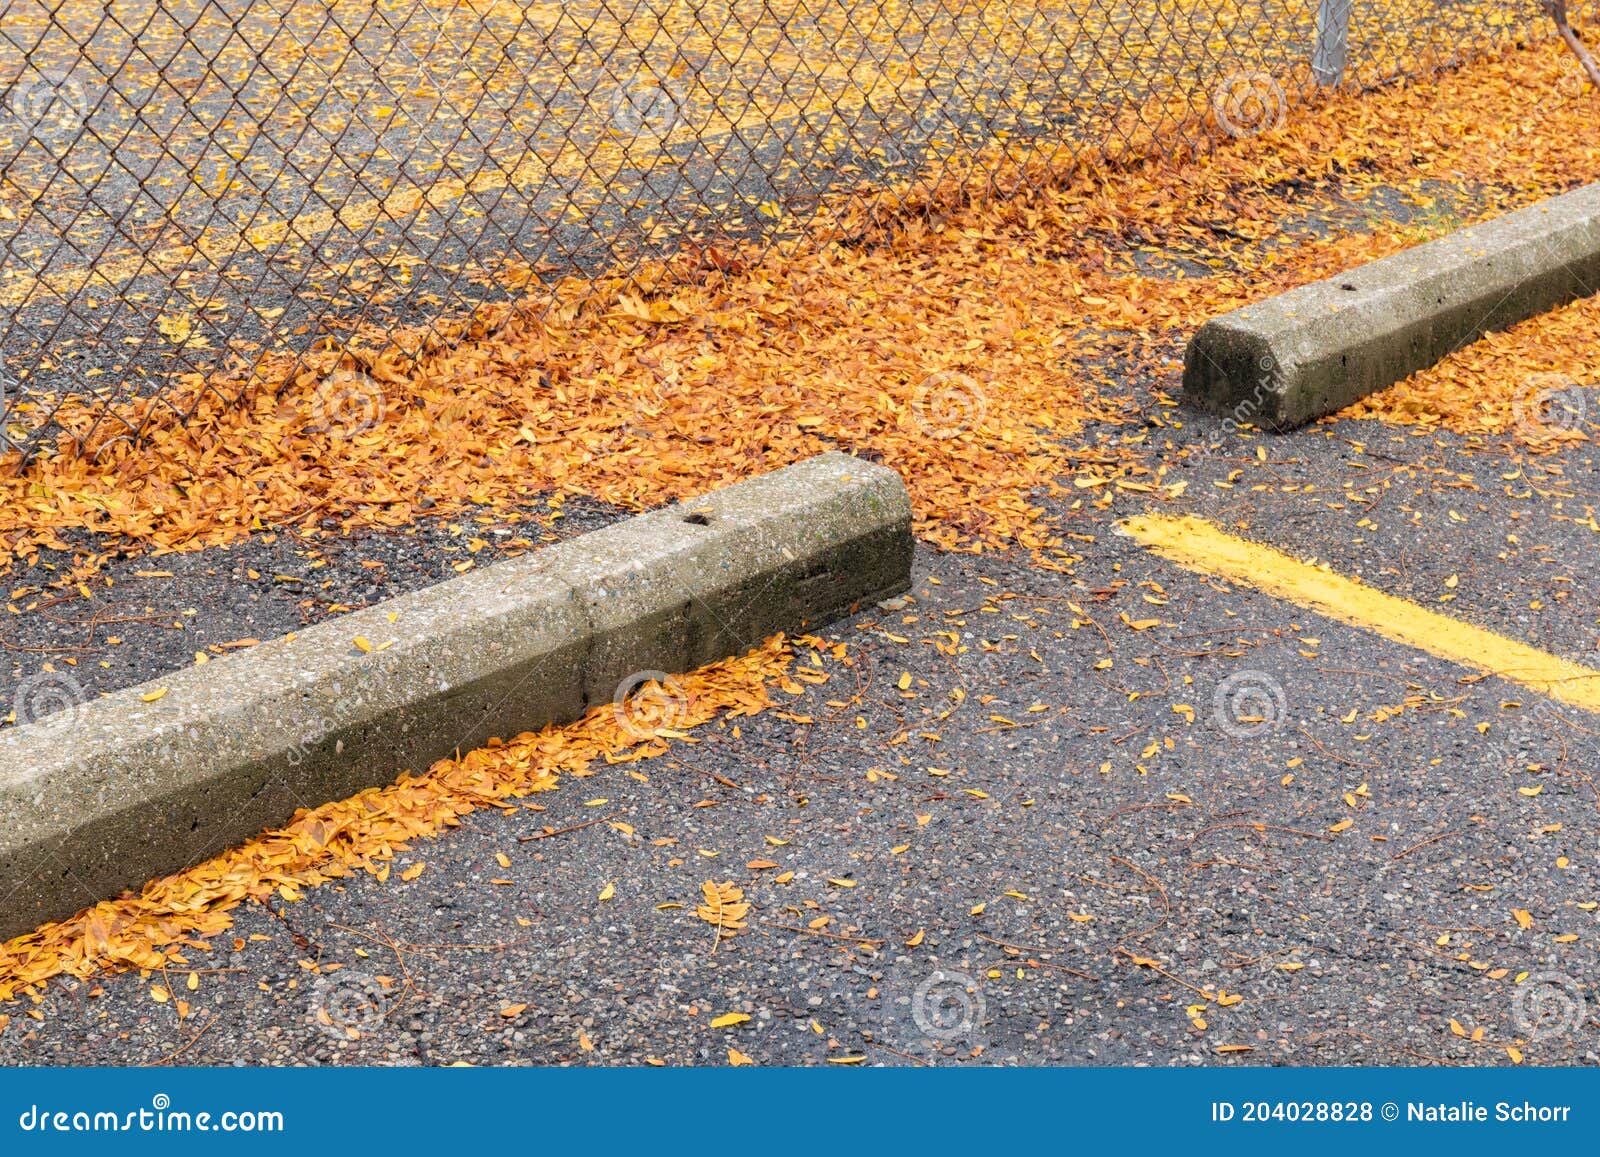 Asphalt Parking Lot with Concrete Curbs, Chain Link Fence, Thick Bright